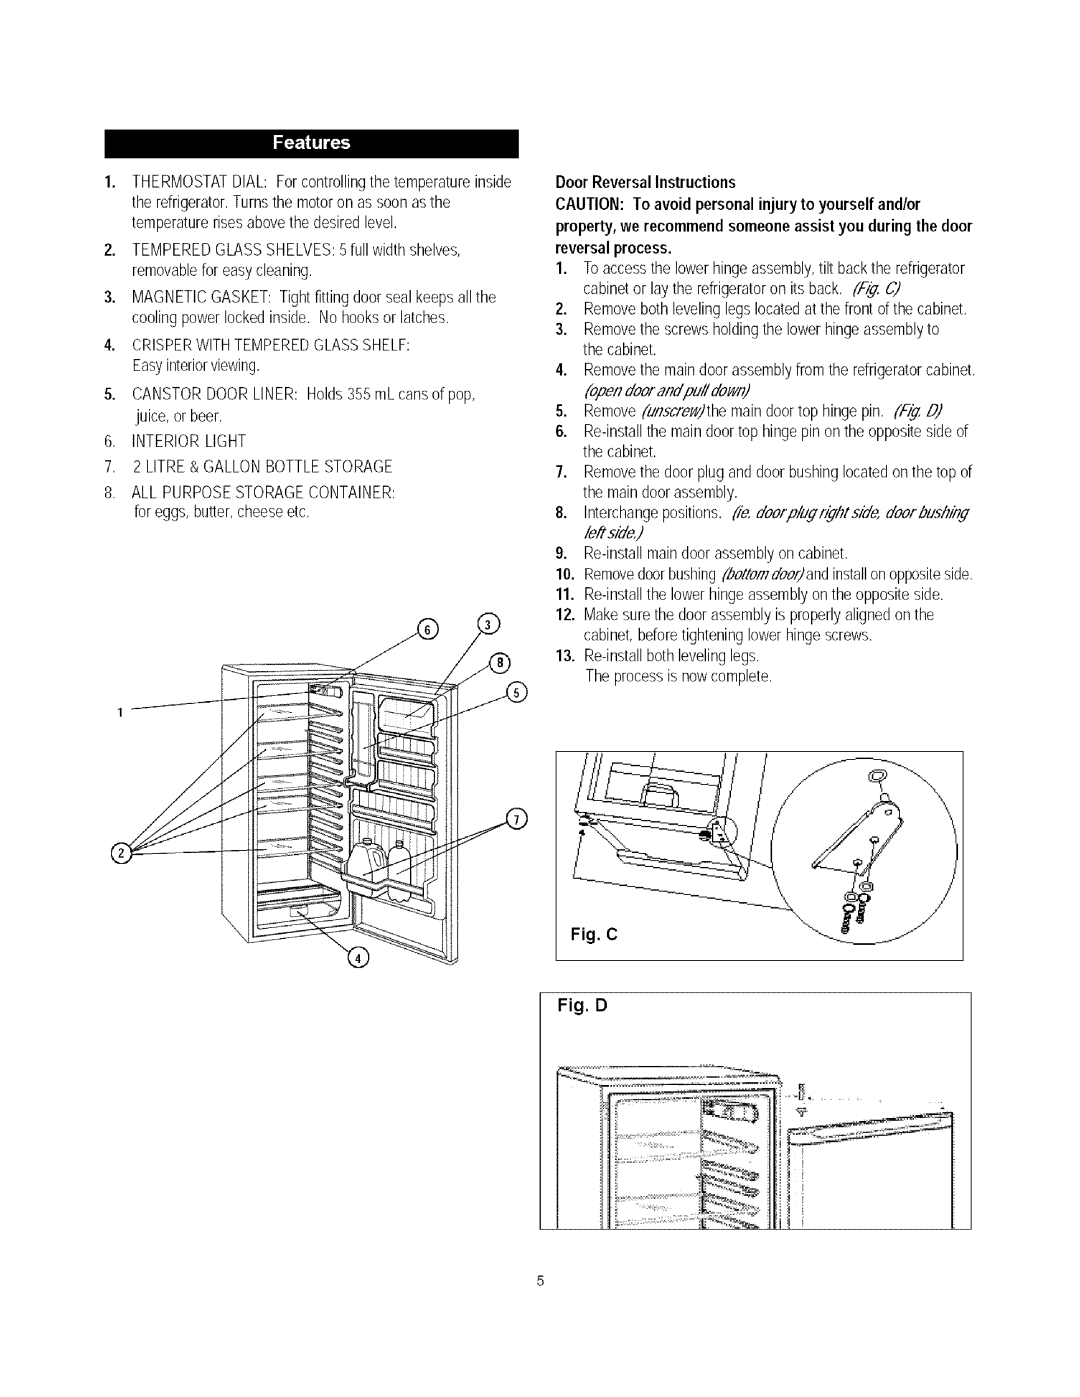 Danby DAR1102W manual DoorReversalInstructions, CAUTION To avoidpersonalinjuryto yourselfand/or, removableforeasycleaning 